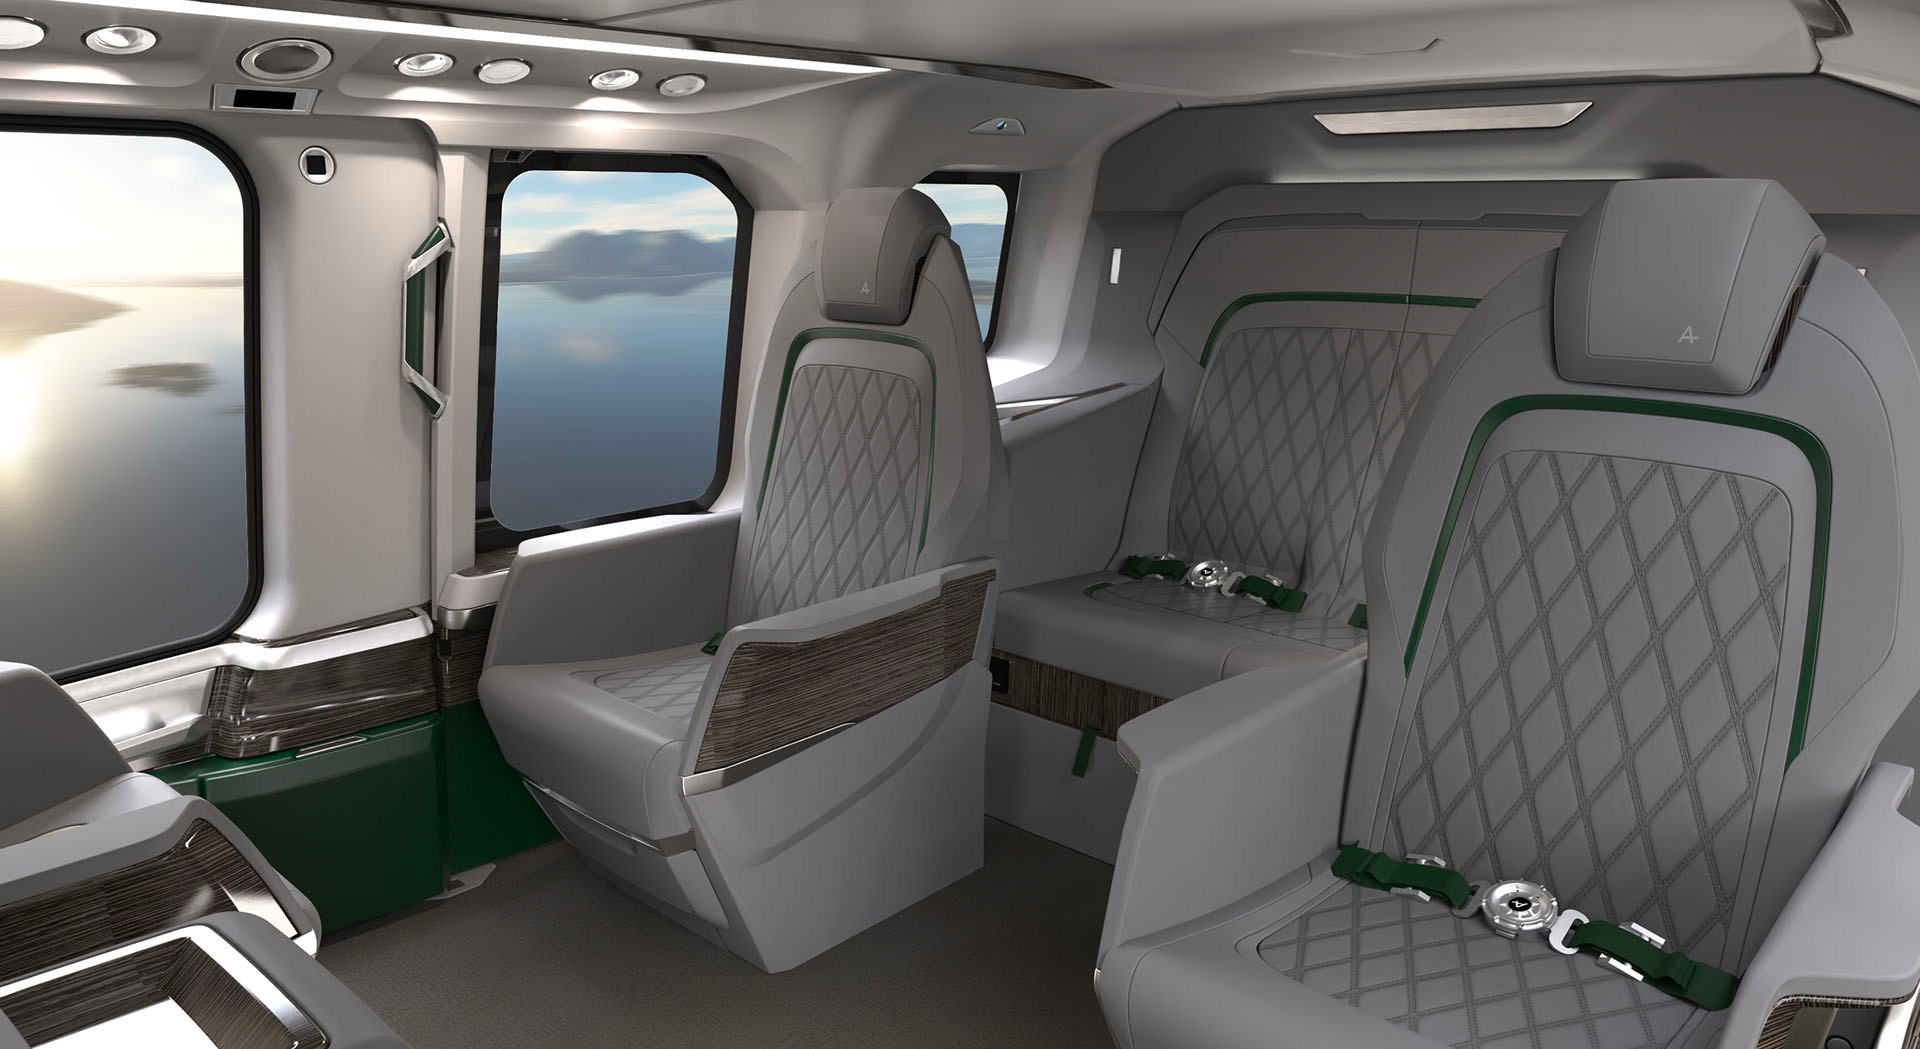 Leonardo at EBACE 2022: new interior solutions and services expand the range of possibilities for VIP helicopter operators under the Agusta VIP brand